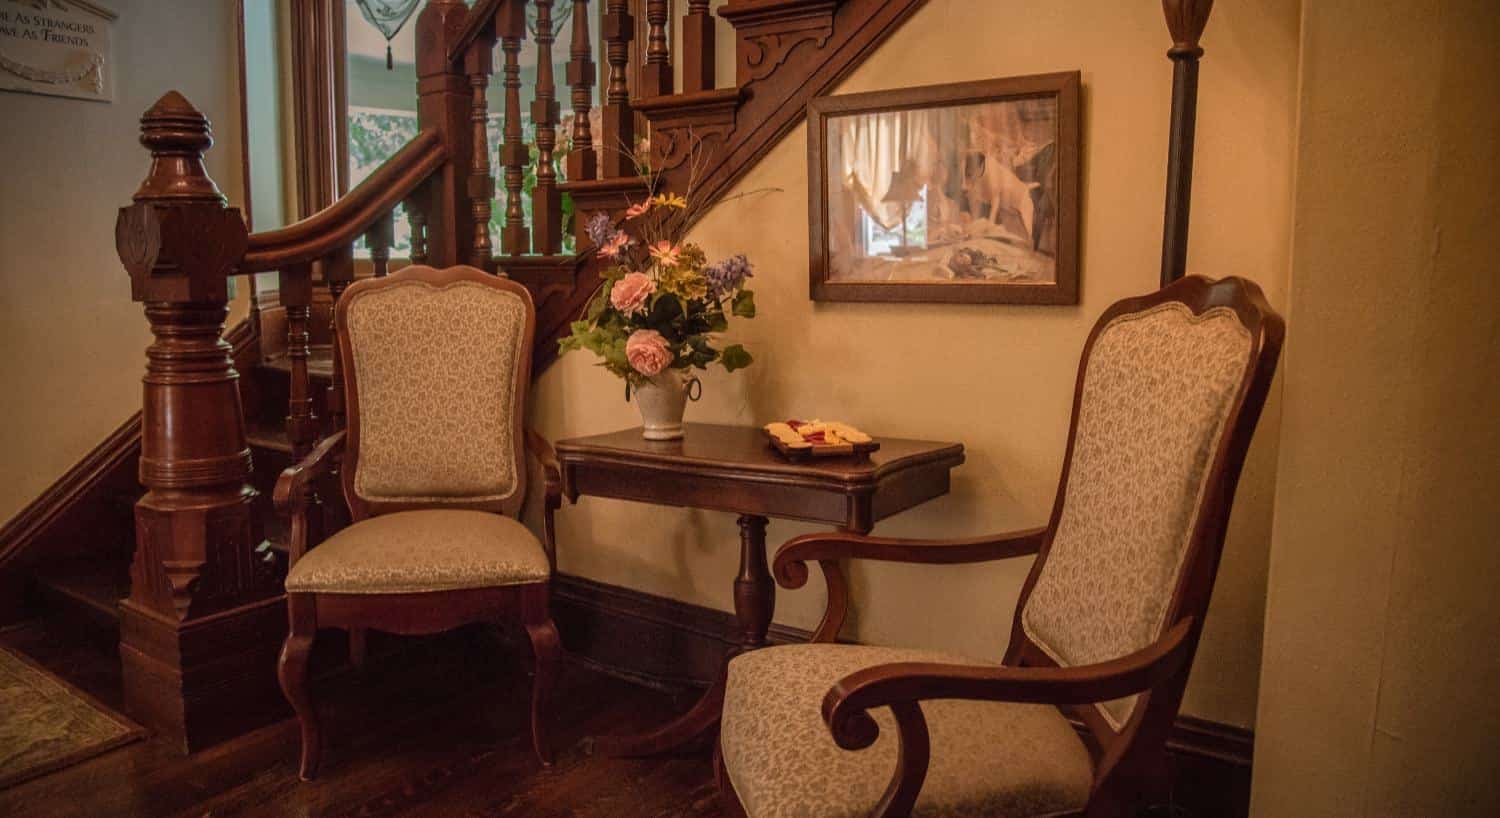 Two Victorian wooden chairs with upholstered backs and bottoms sitting next to wooden staircase